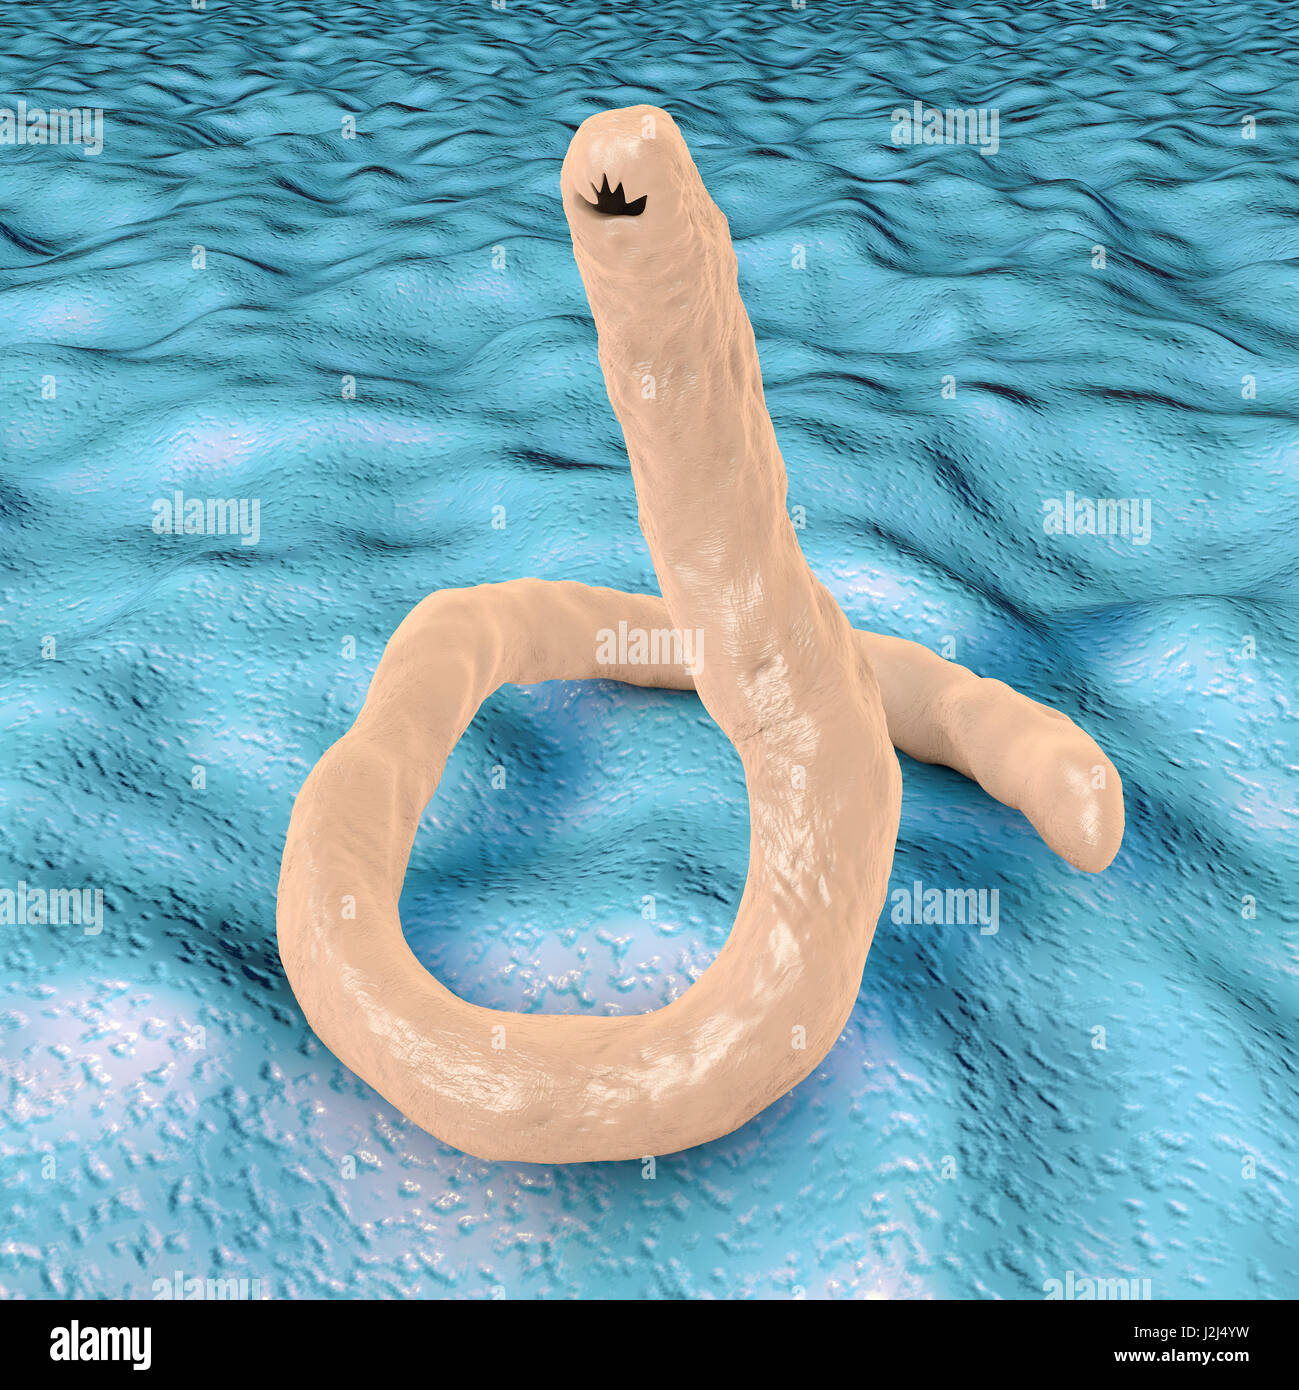 Computer illustration of the parasitic hookworm Ancylostoma duodenale. This is one of the commonest causes of hookworm infestation in humans, particularly in sub-tropical regions such as North Africa and India. The worm's head contains several tooth-like Stock Photo